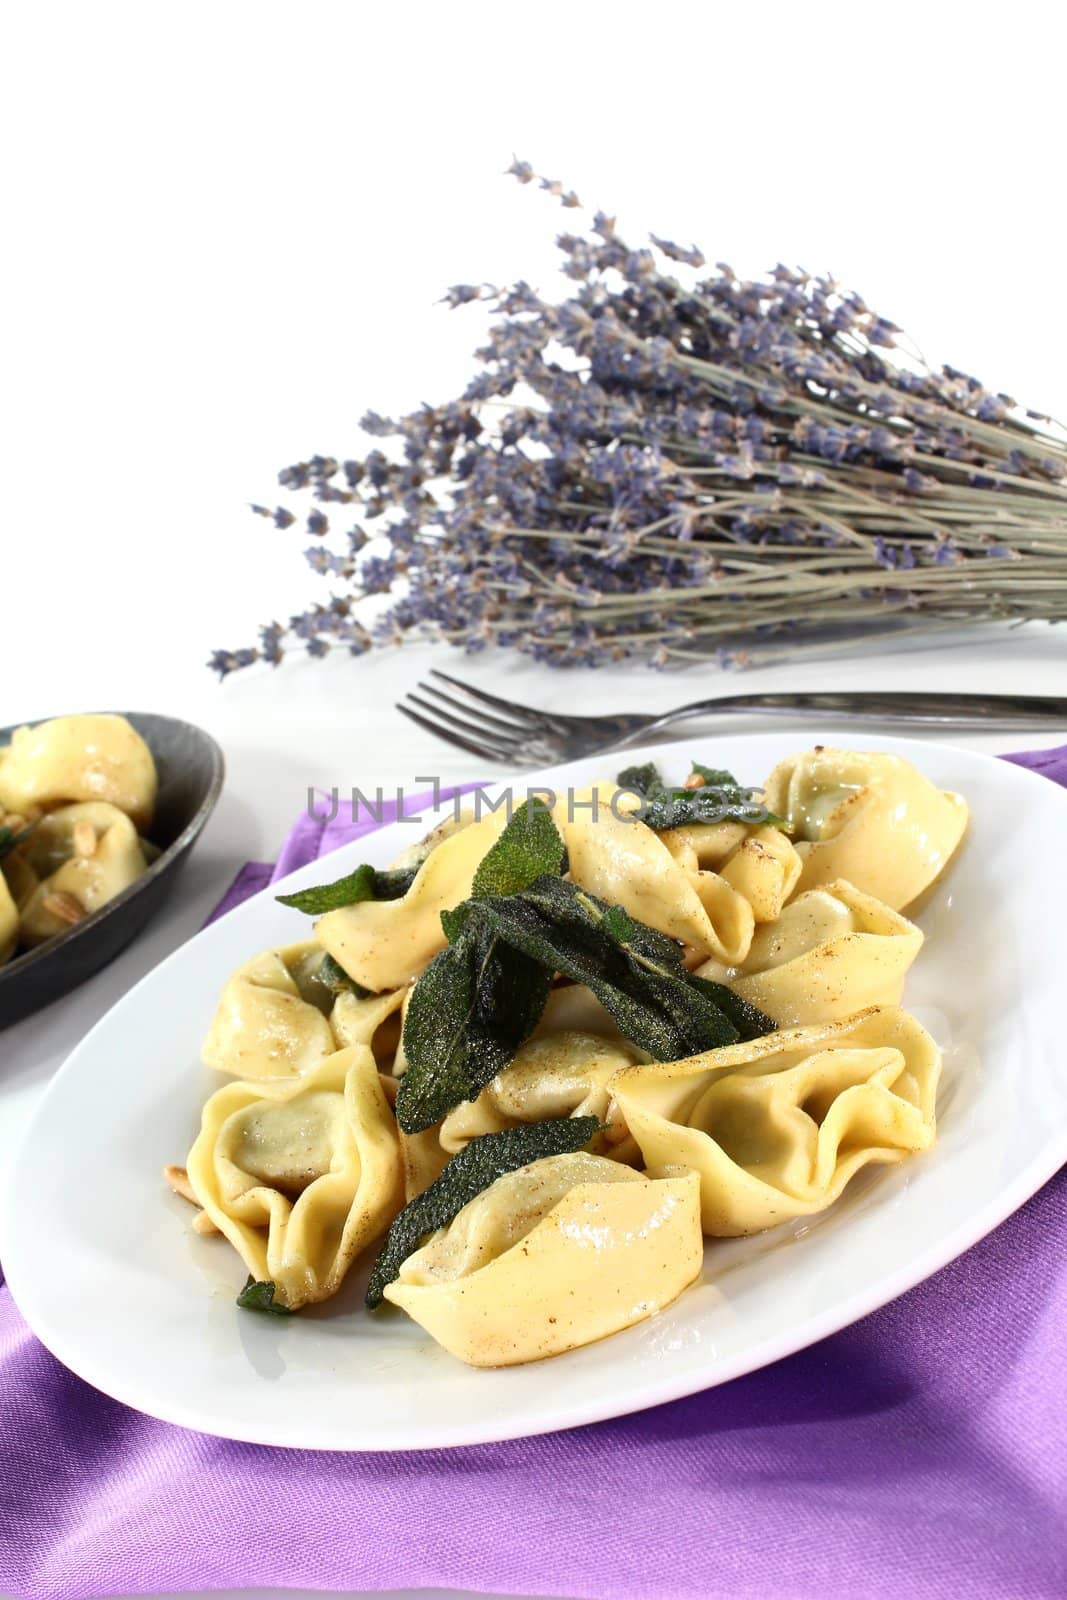 Tortellini with fried sage leaves and pine nuts